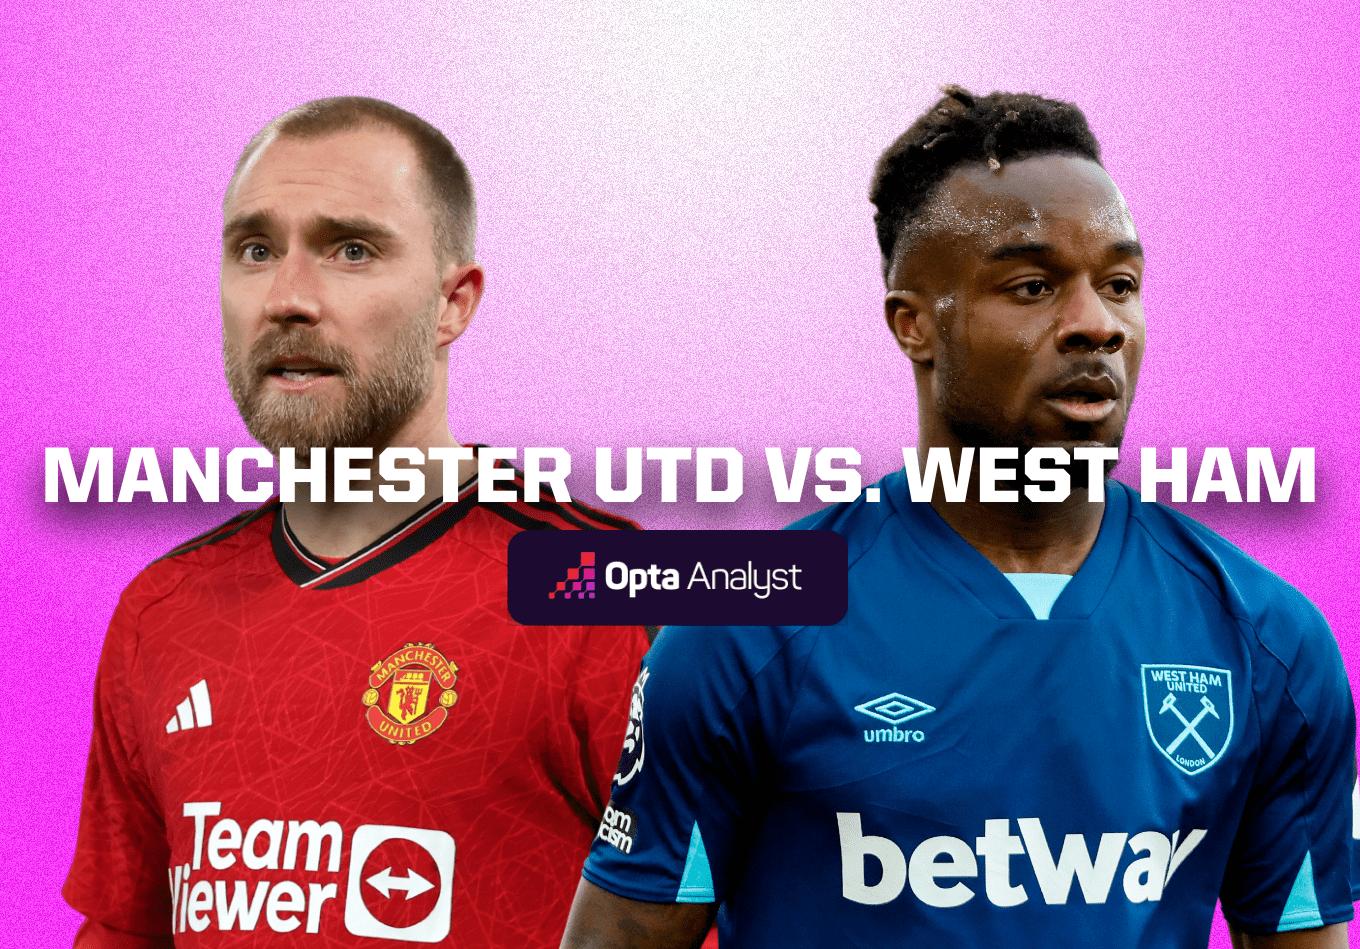 Manchester United vs West Ham: Prediction and Preview